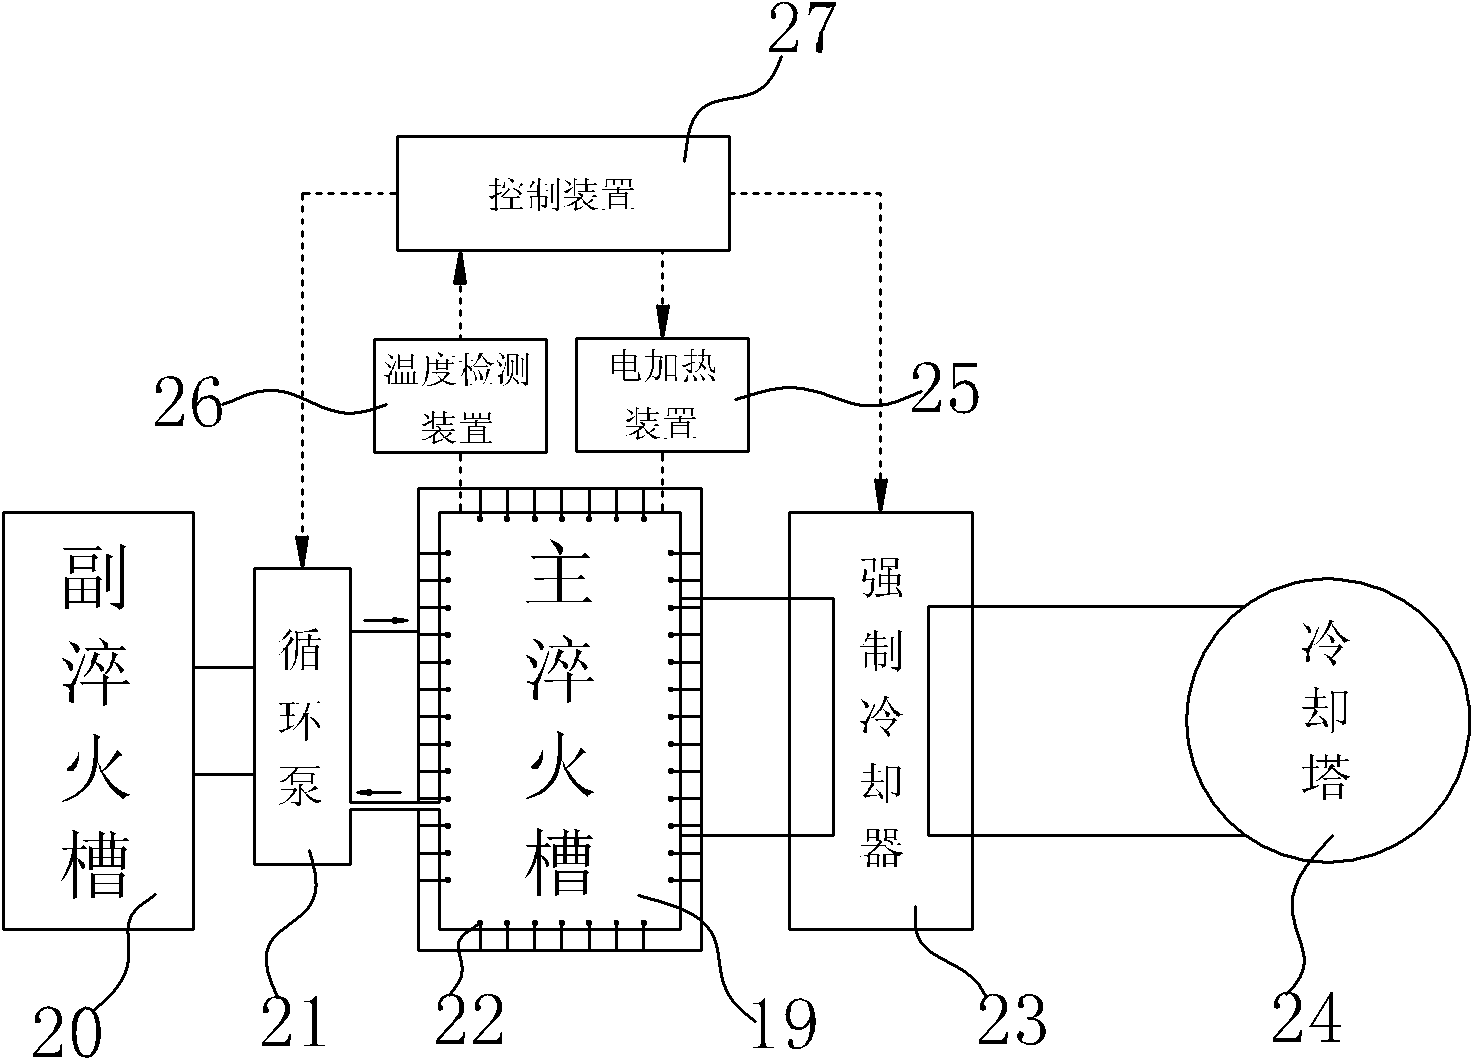 Integrated immersion quenching device of steel bottle quenching-and-tempering line